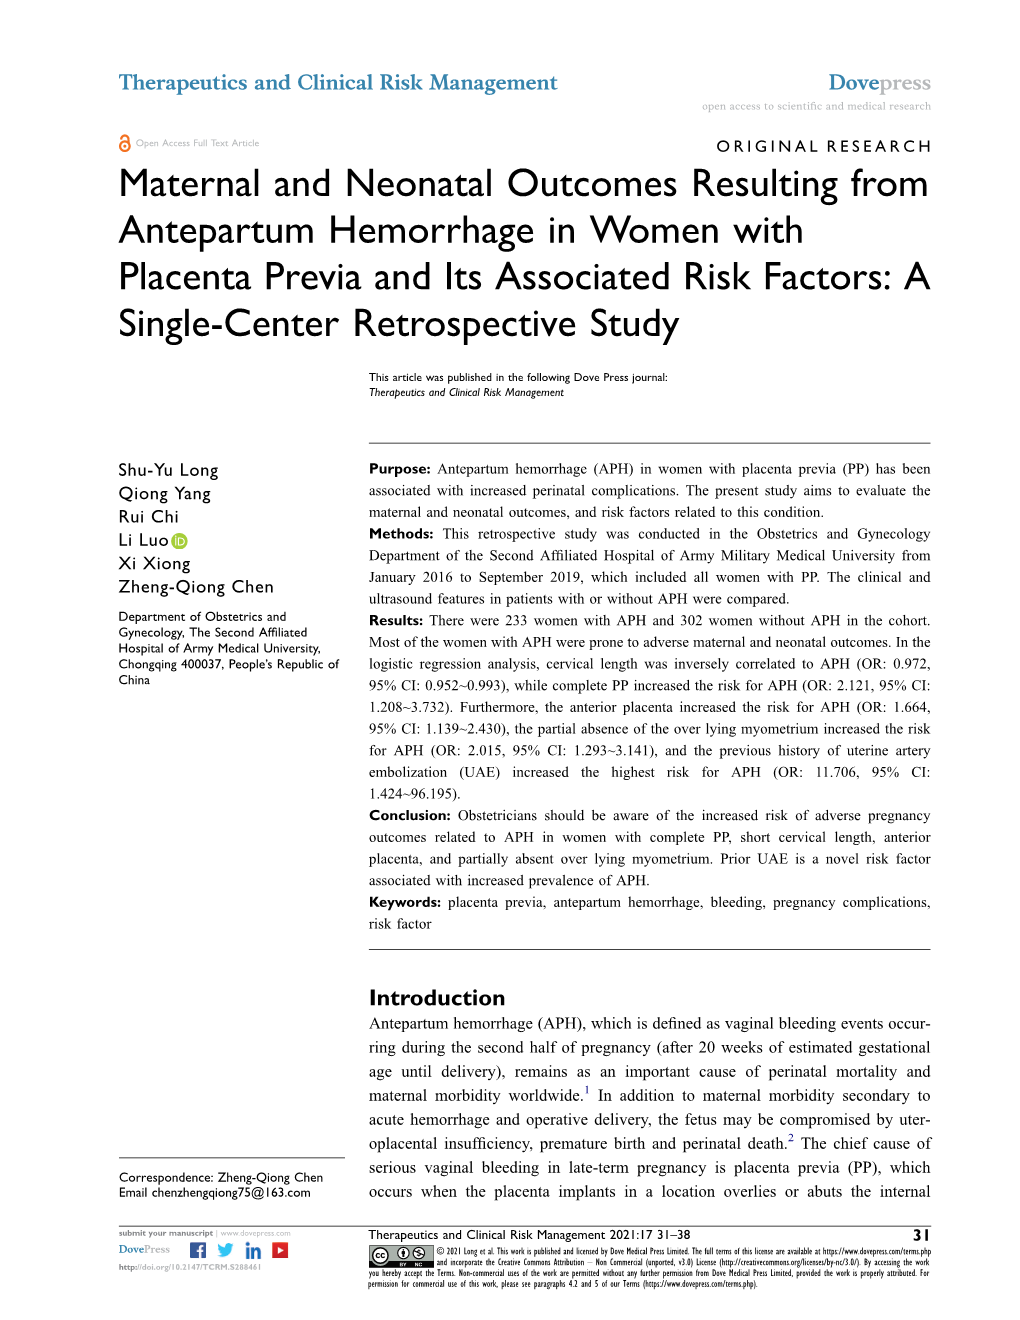 Maternal and Neonatal Outcomes Resulting from Antepartum Hemorrhage in Women with Placenta Previa and Its Associated Risk Factors: a Single-Center Retrospective Study